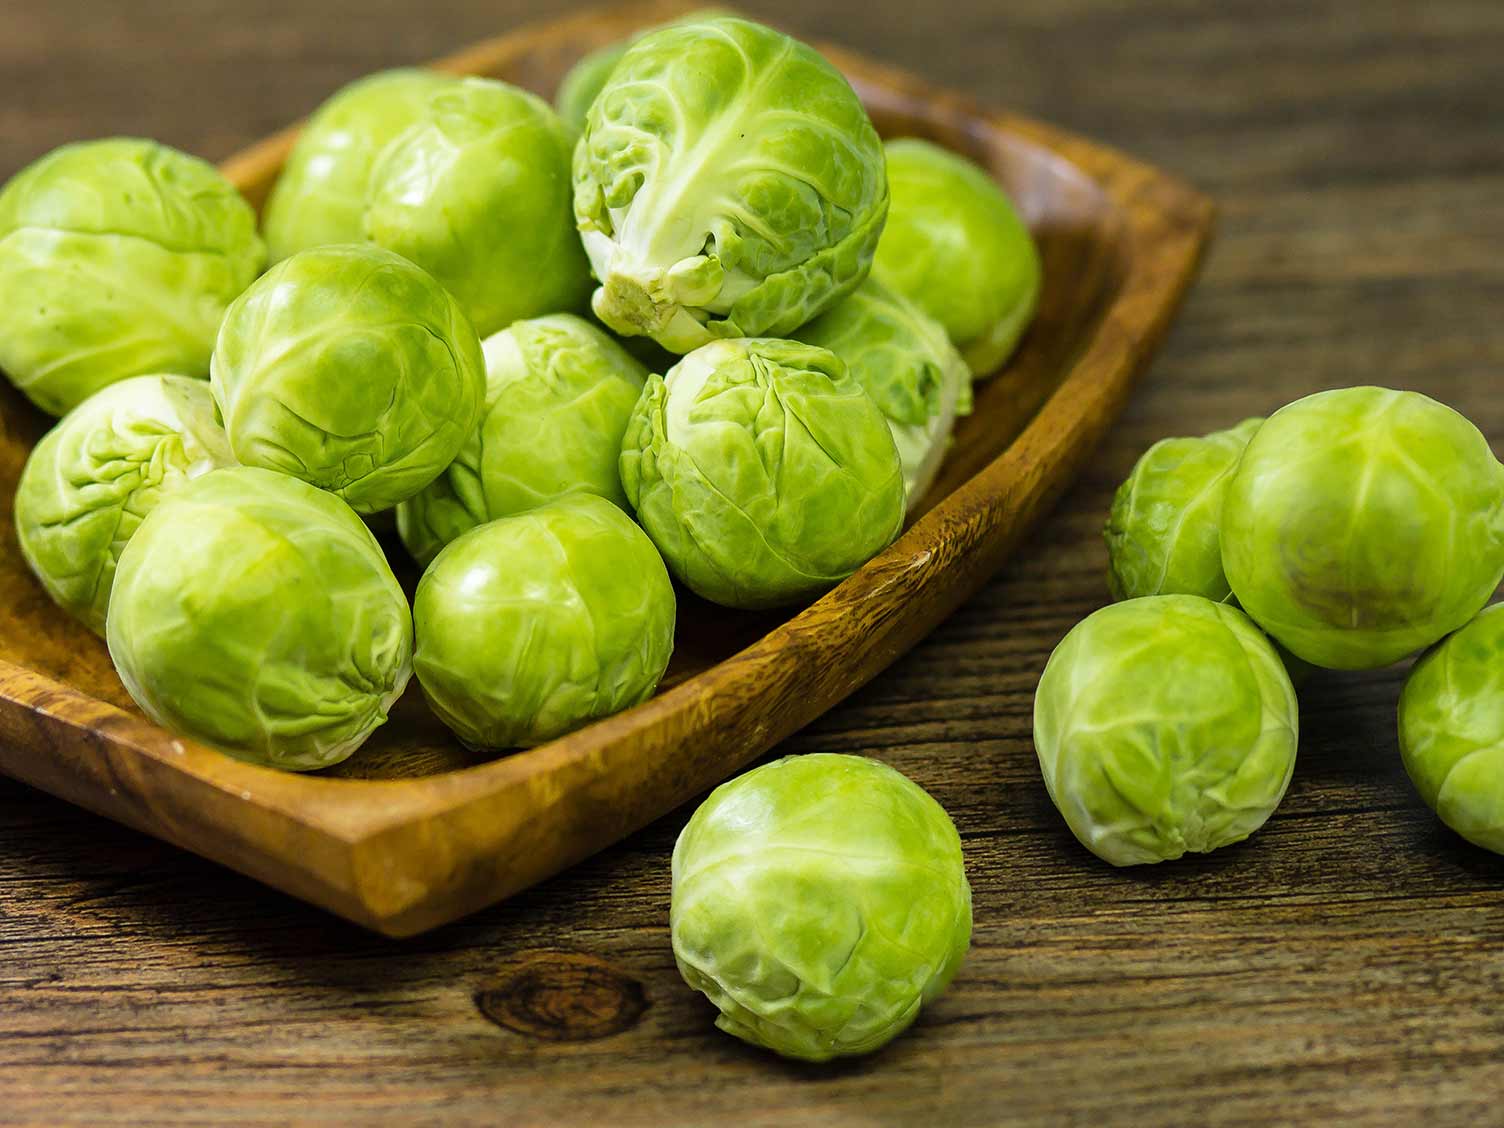 Brussel sprouts - when to sow and grow | lovethegarden